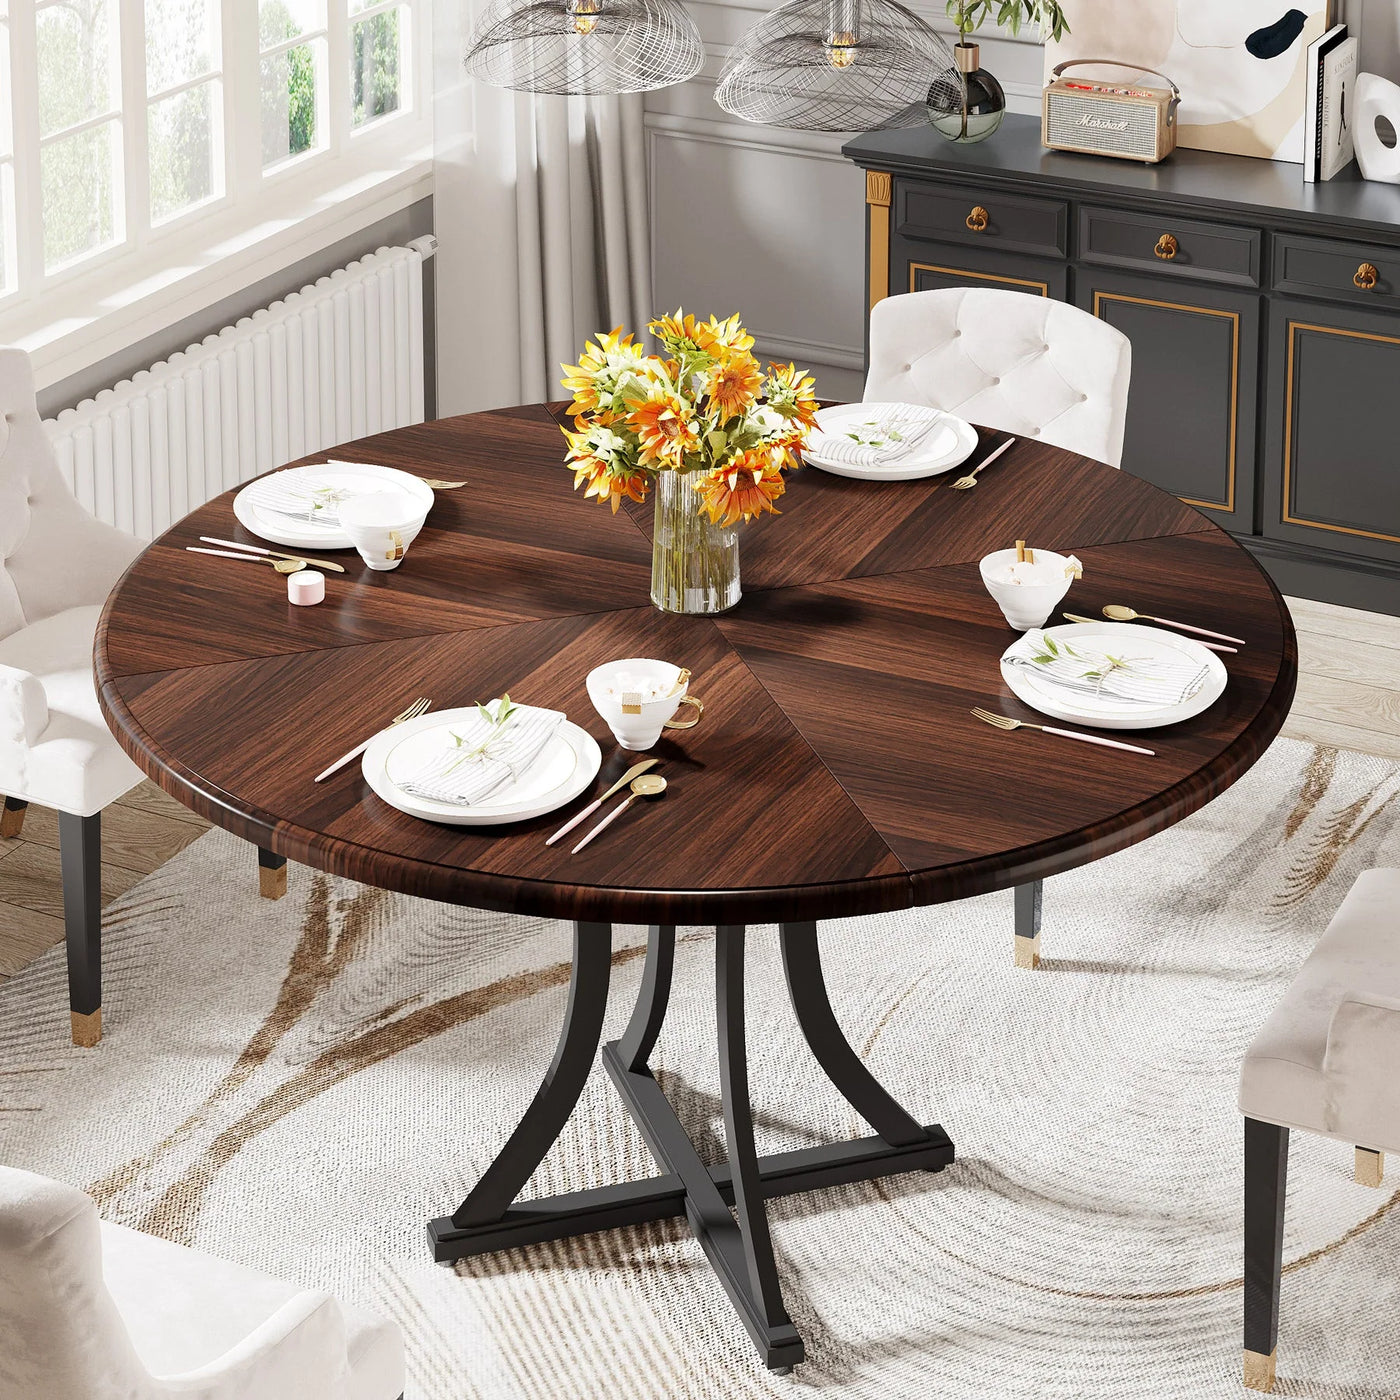 47.24" Round Dining Table, Circle Kitchen Table with Metal Base for 4-6 People